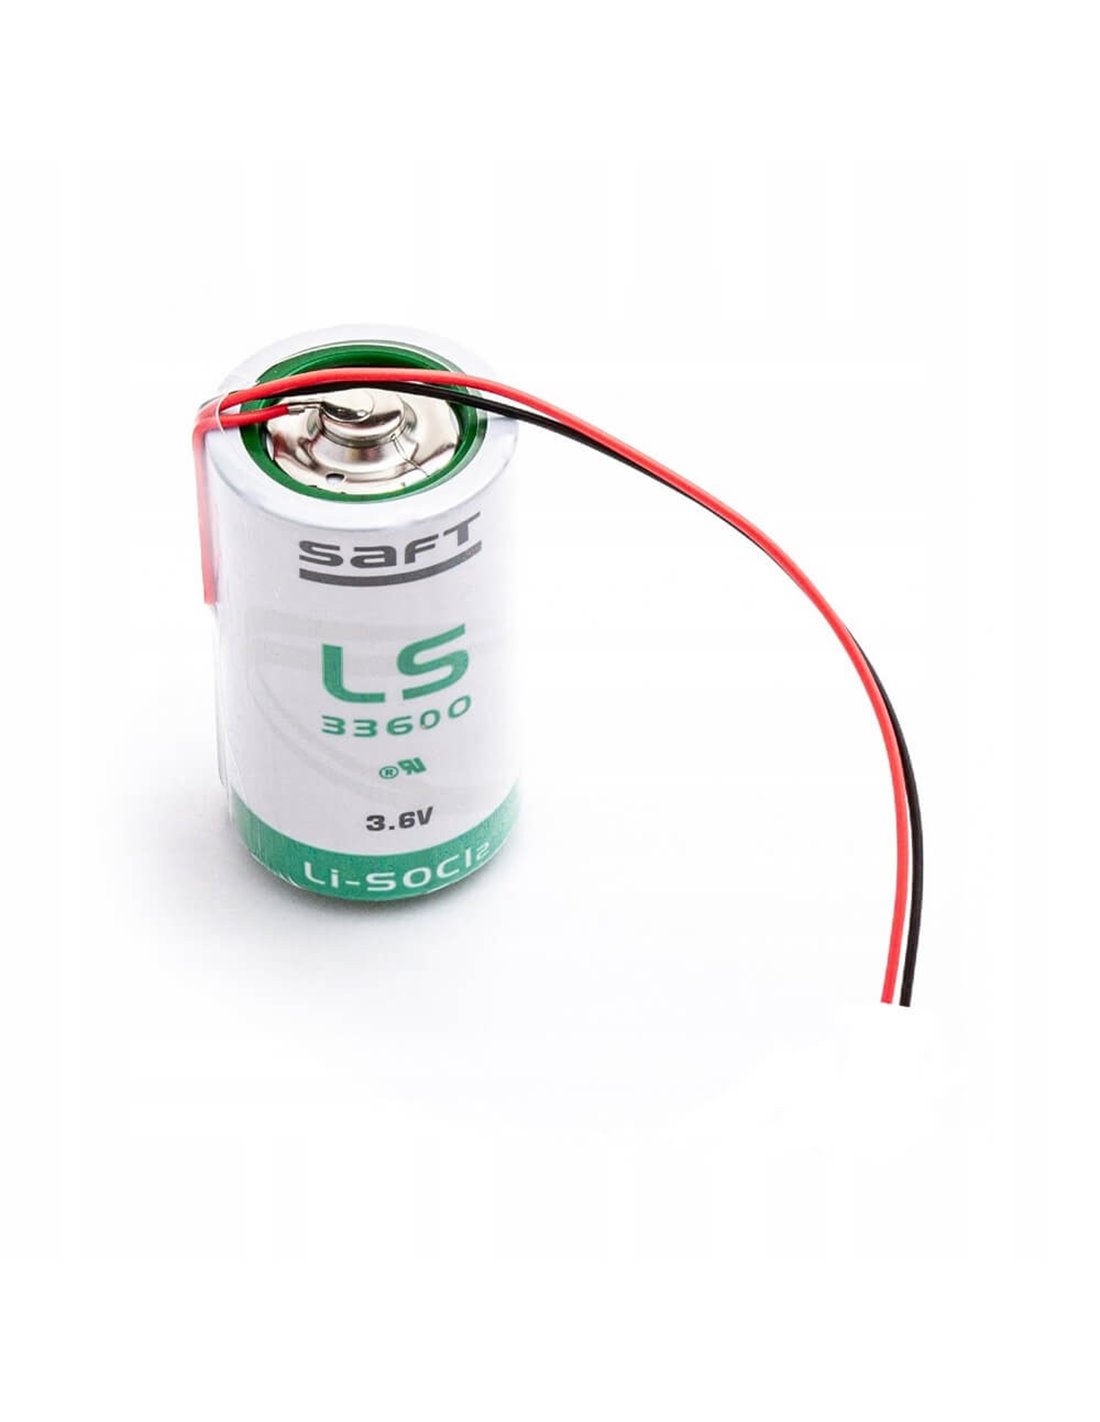 Saft LS33600 With Inch Fly Leads 3.6V 17000Mah